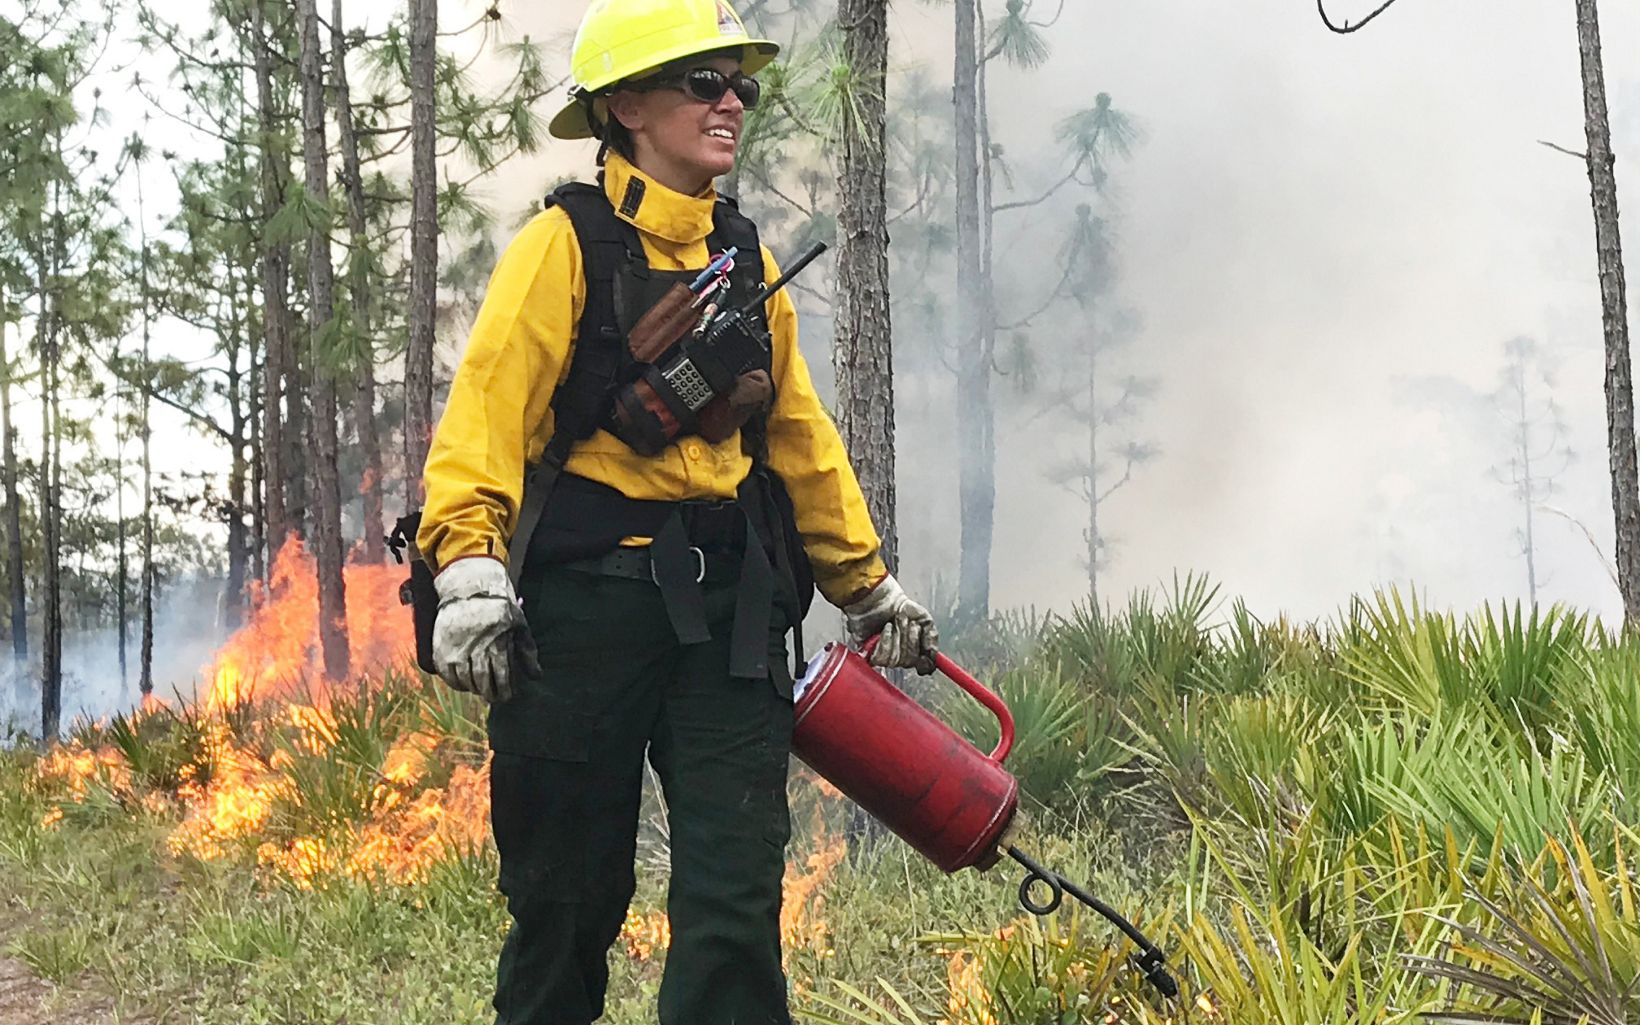 Igniting Inspiration Land conservation coordinator Cody-Marie Miller sets the woods alight with a drip torch during a prescribed burn at The Disney Wilderness Preserve.  © Zach Prusak/TNC